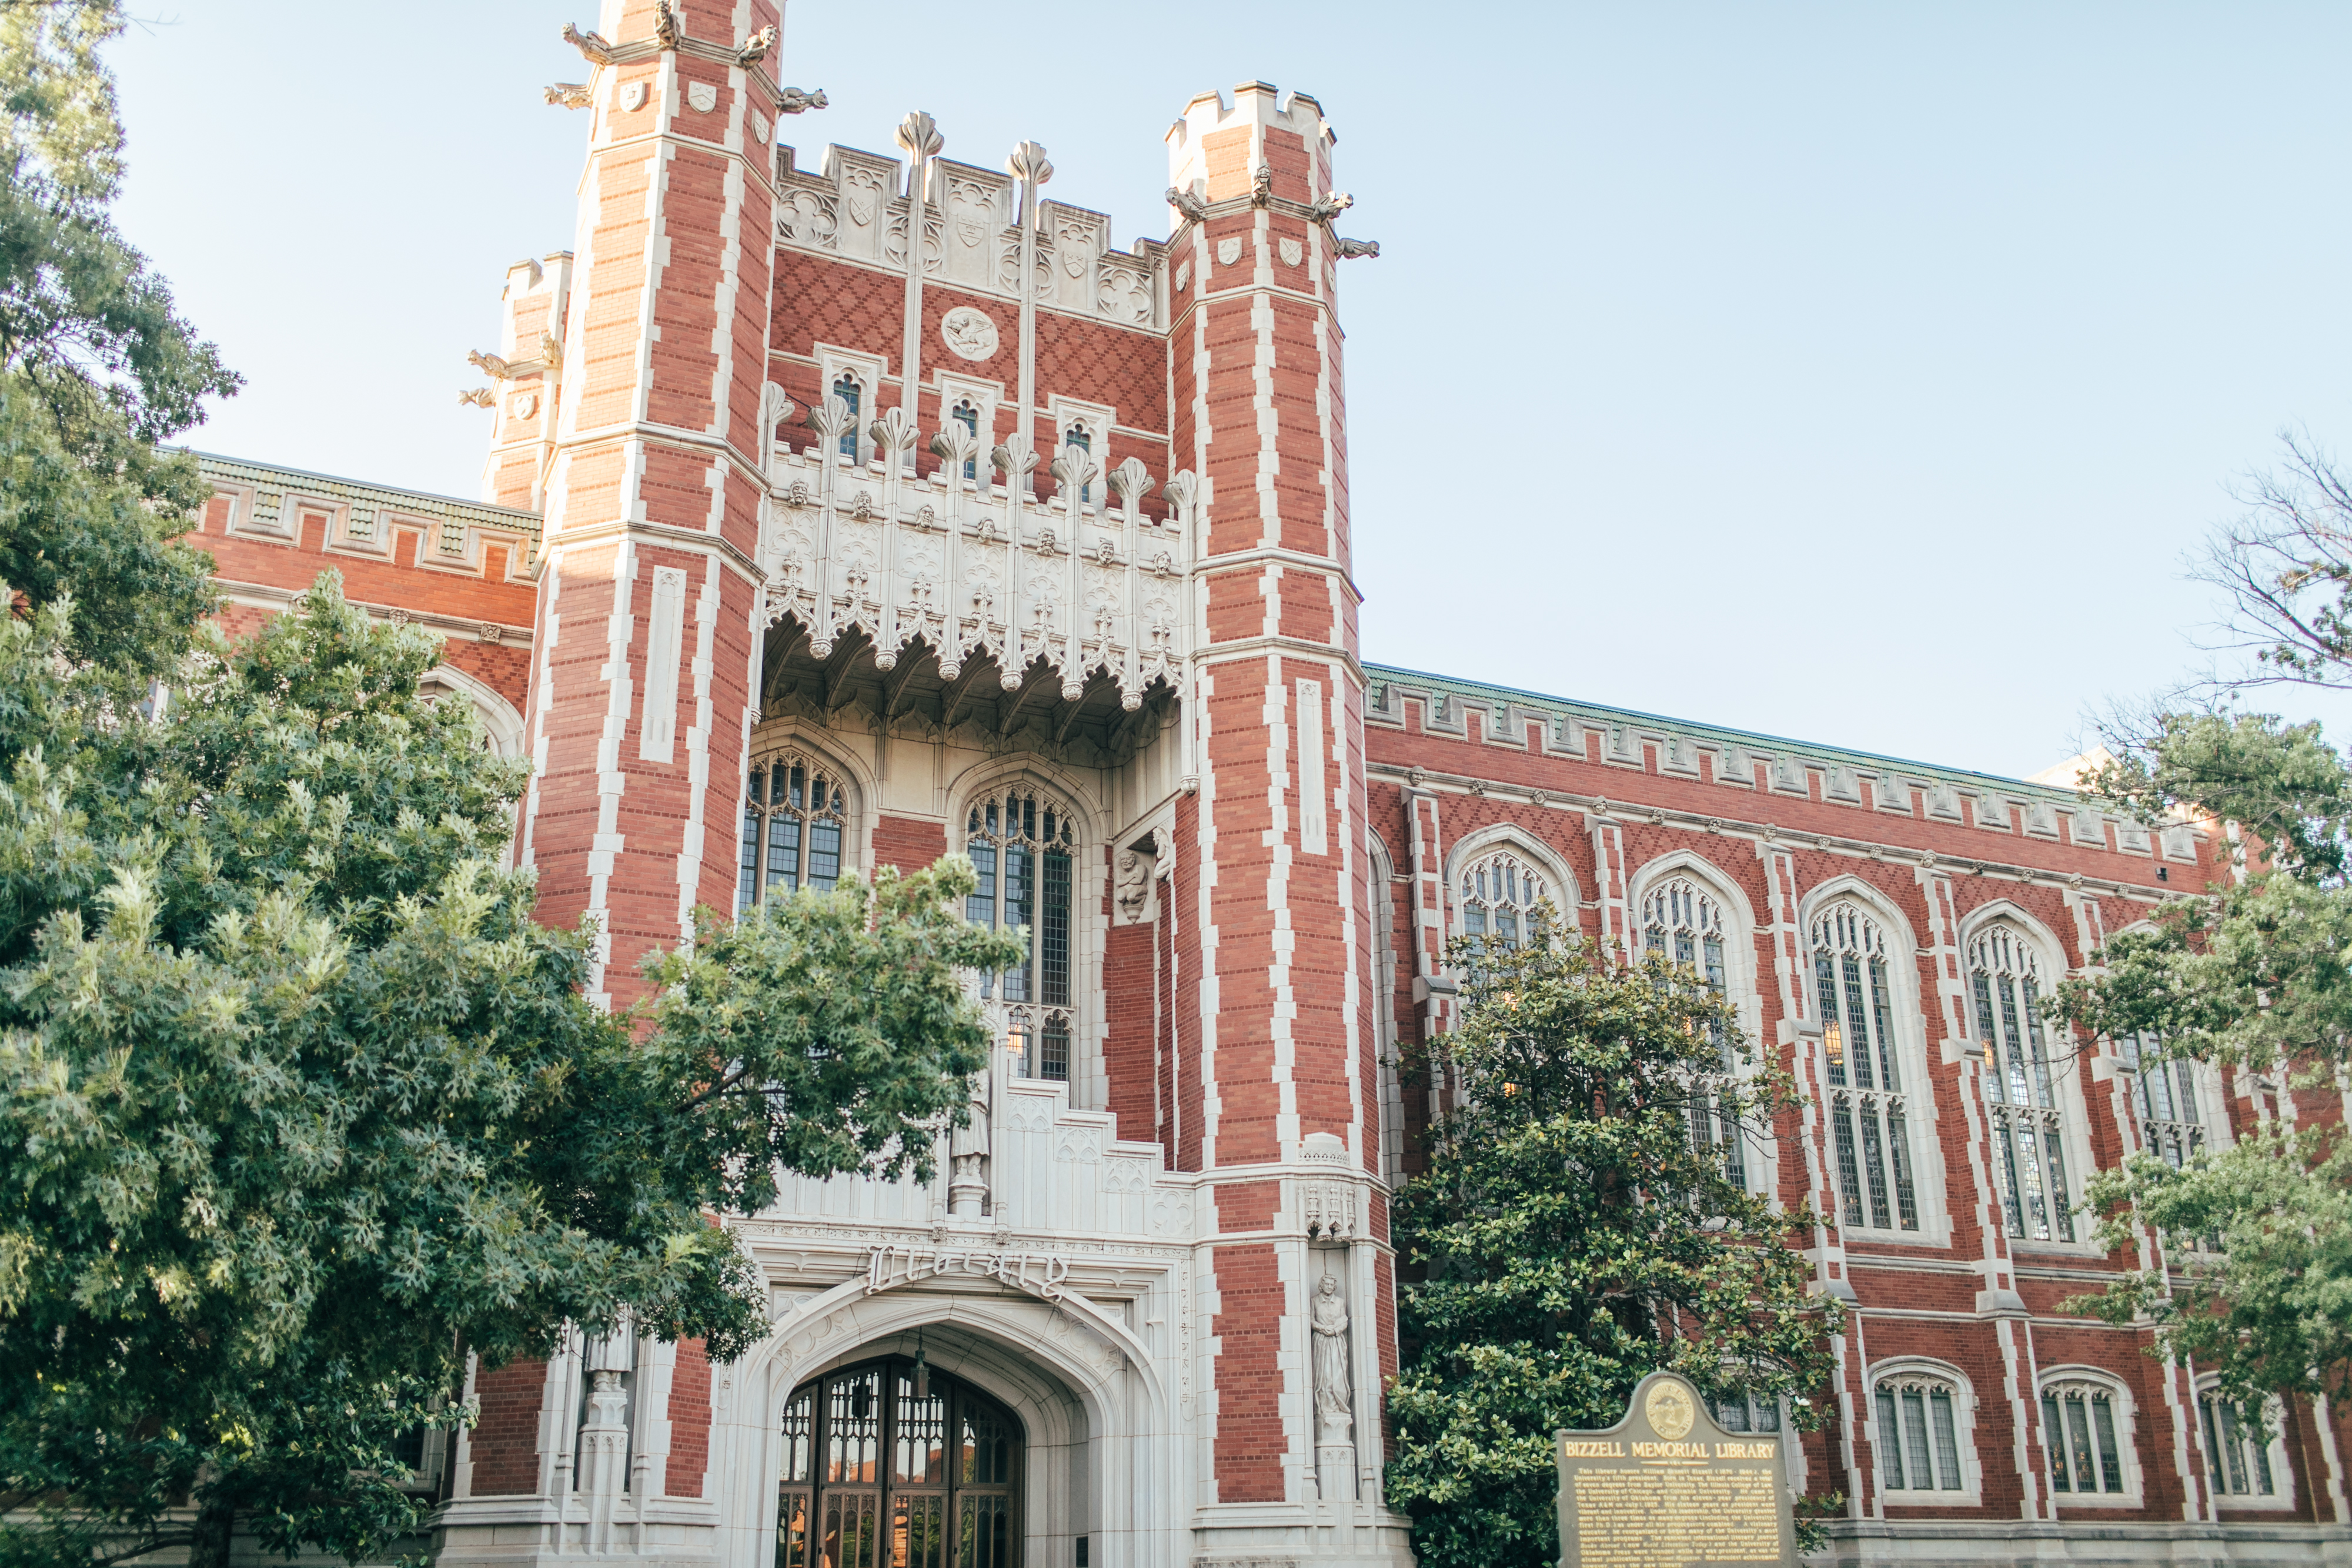 Photos of OU Campus - Bizzell Library in the summer